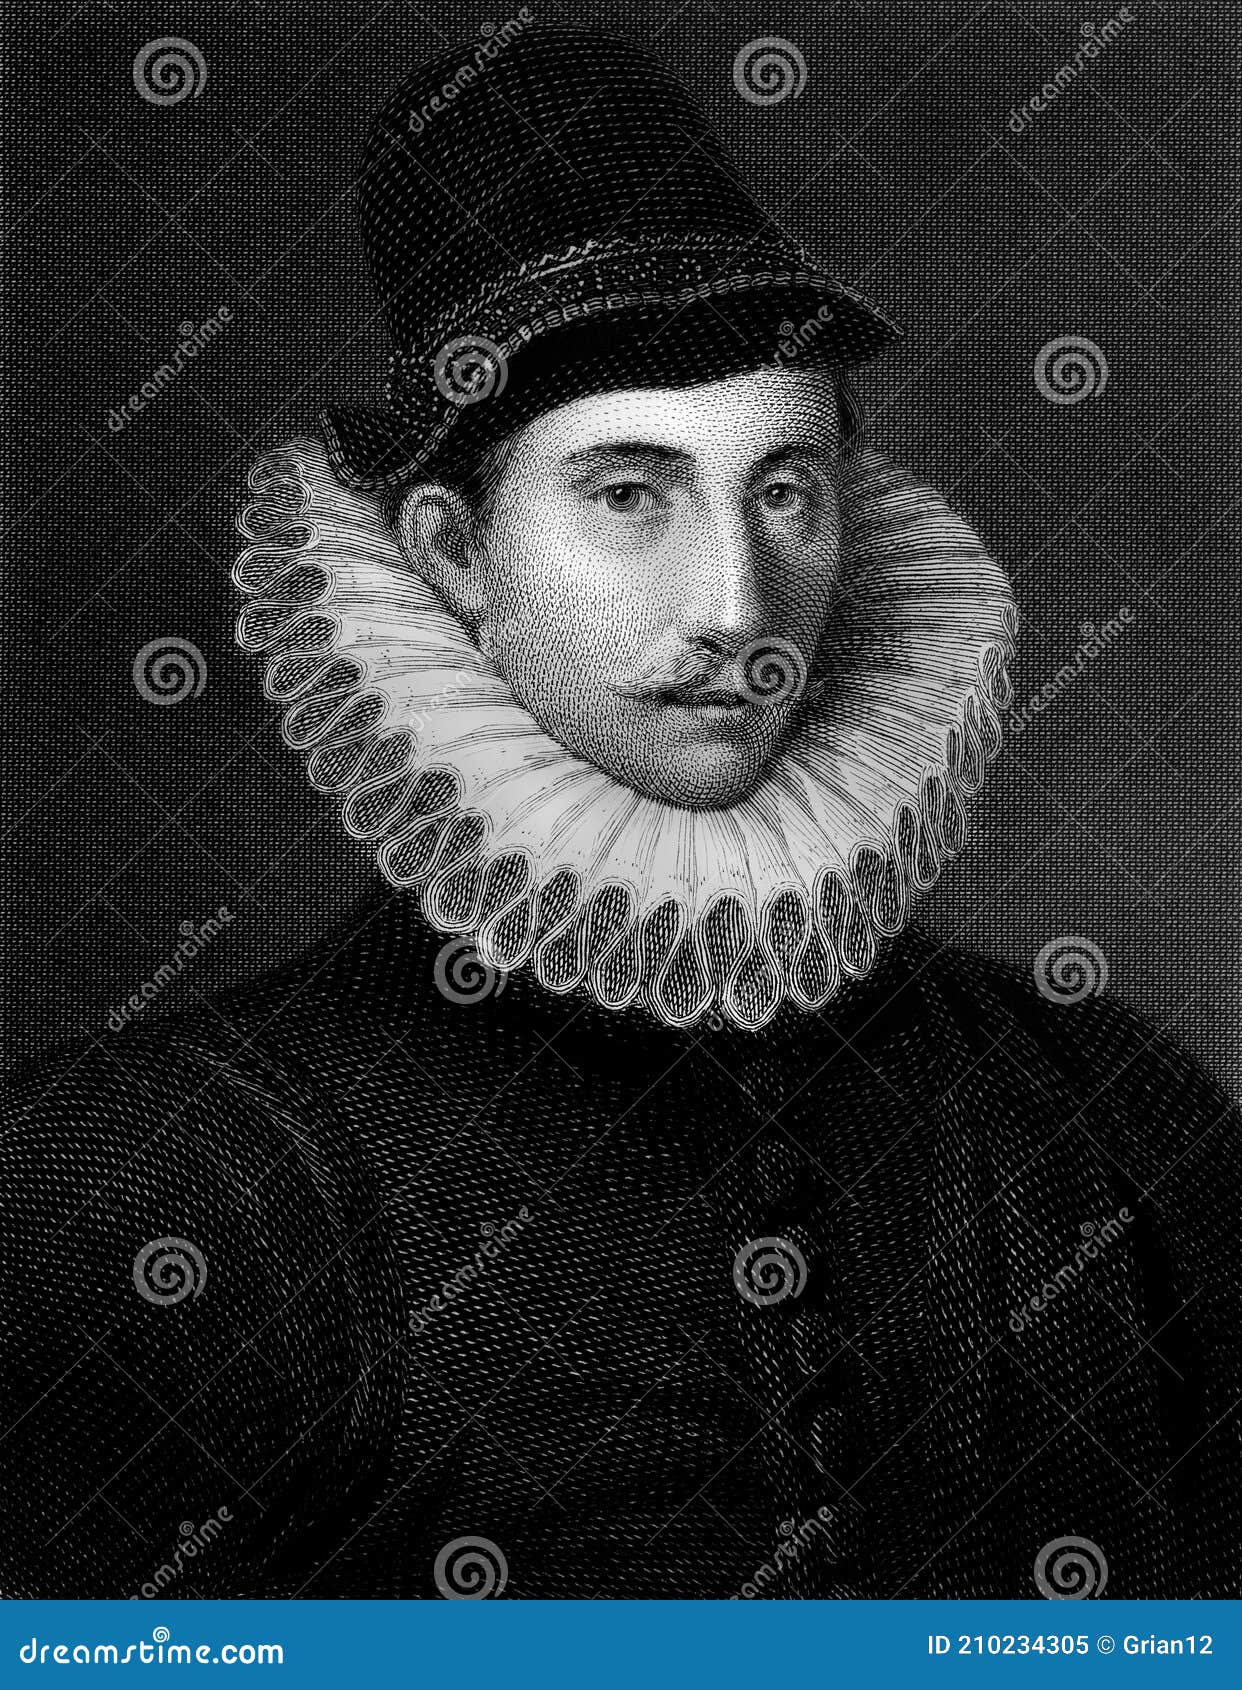 portrait of an early seventeenth century english poet and playwright